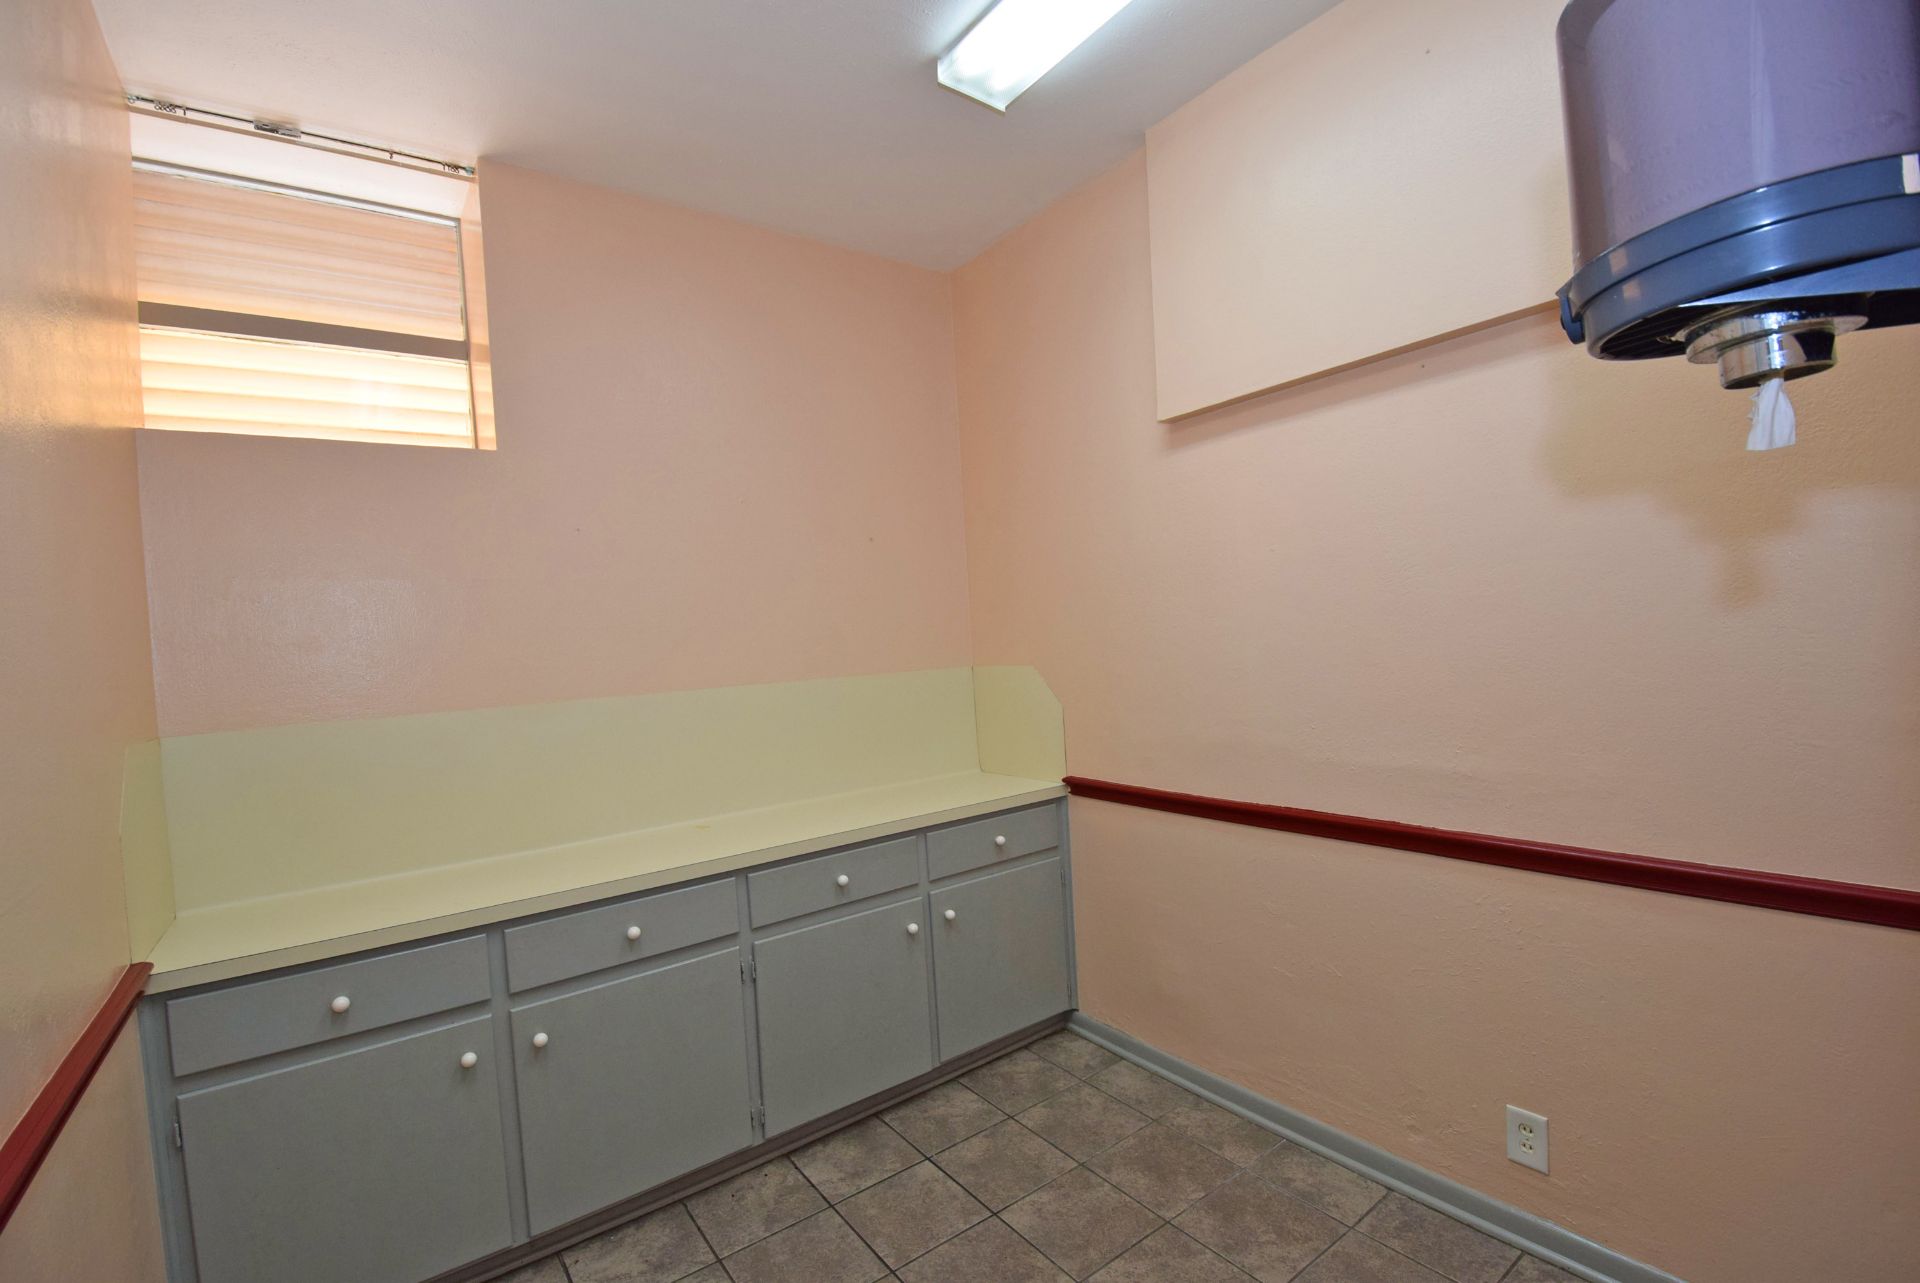 Corpus Christi Commercial Building - Image 36 of 49